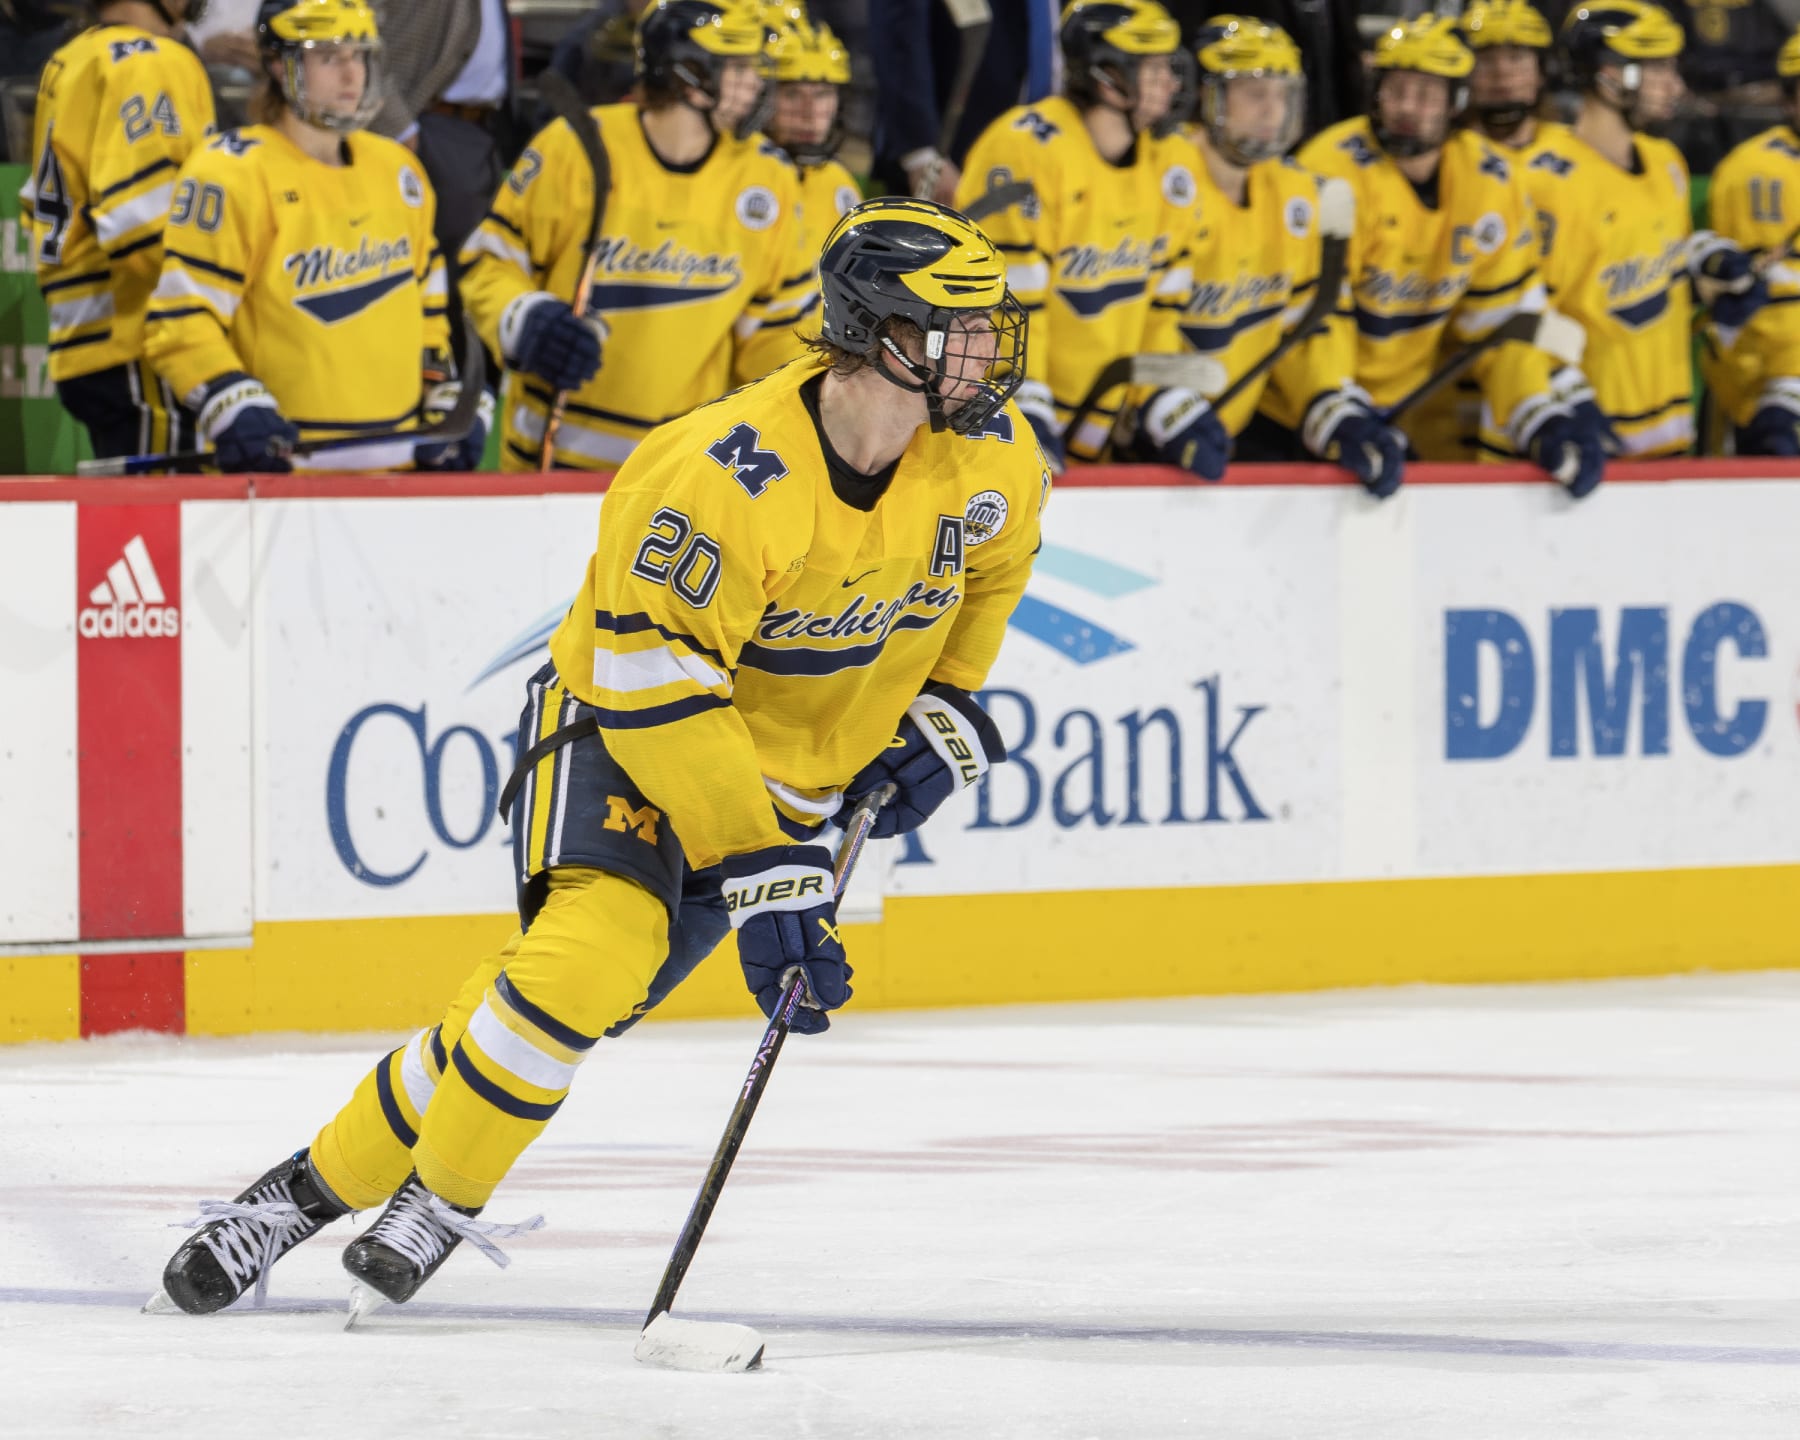 Wolverines forward Kent Johnson scores 'The Michigan' goal at worlds